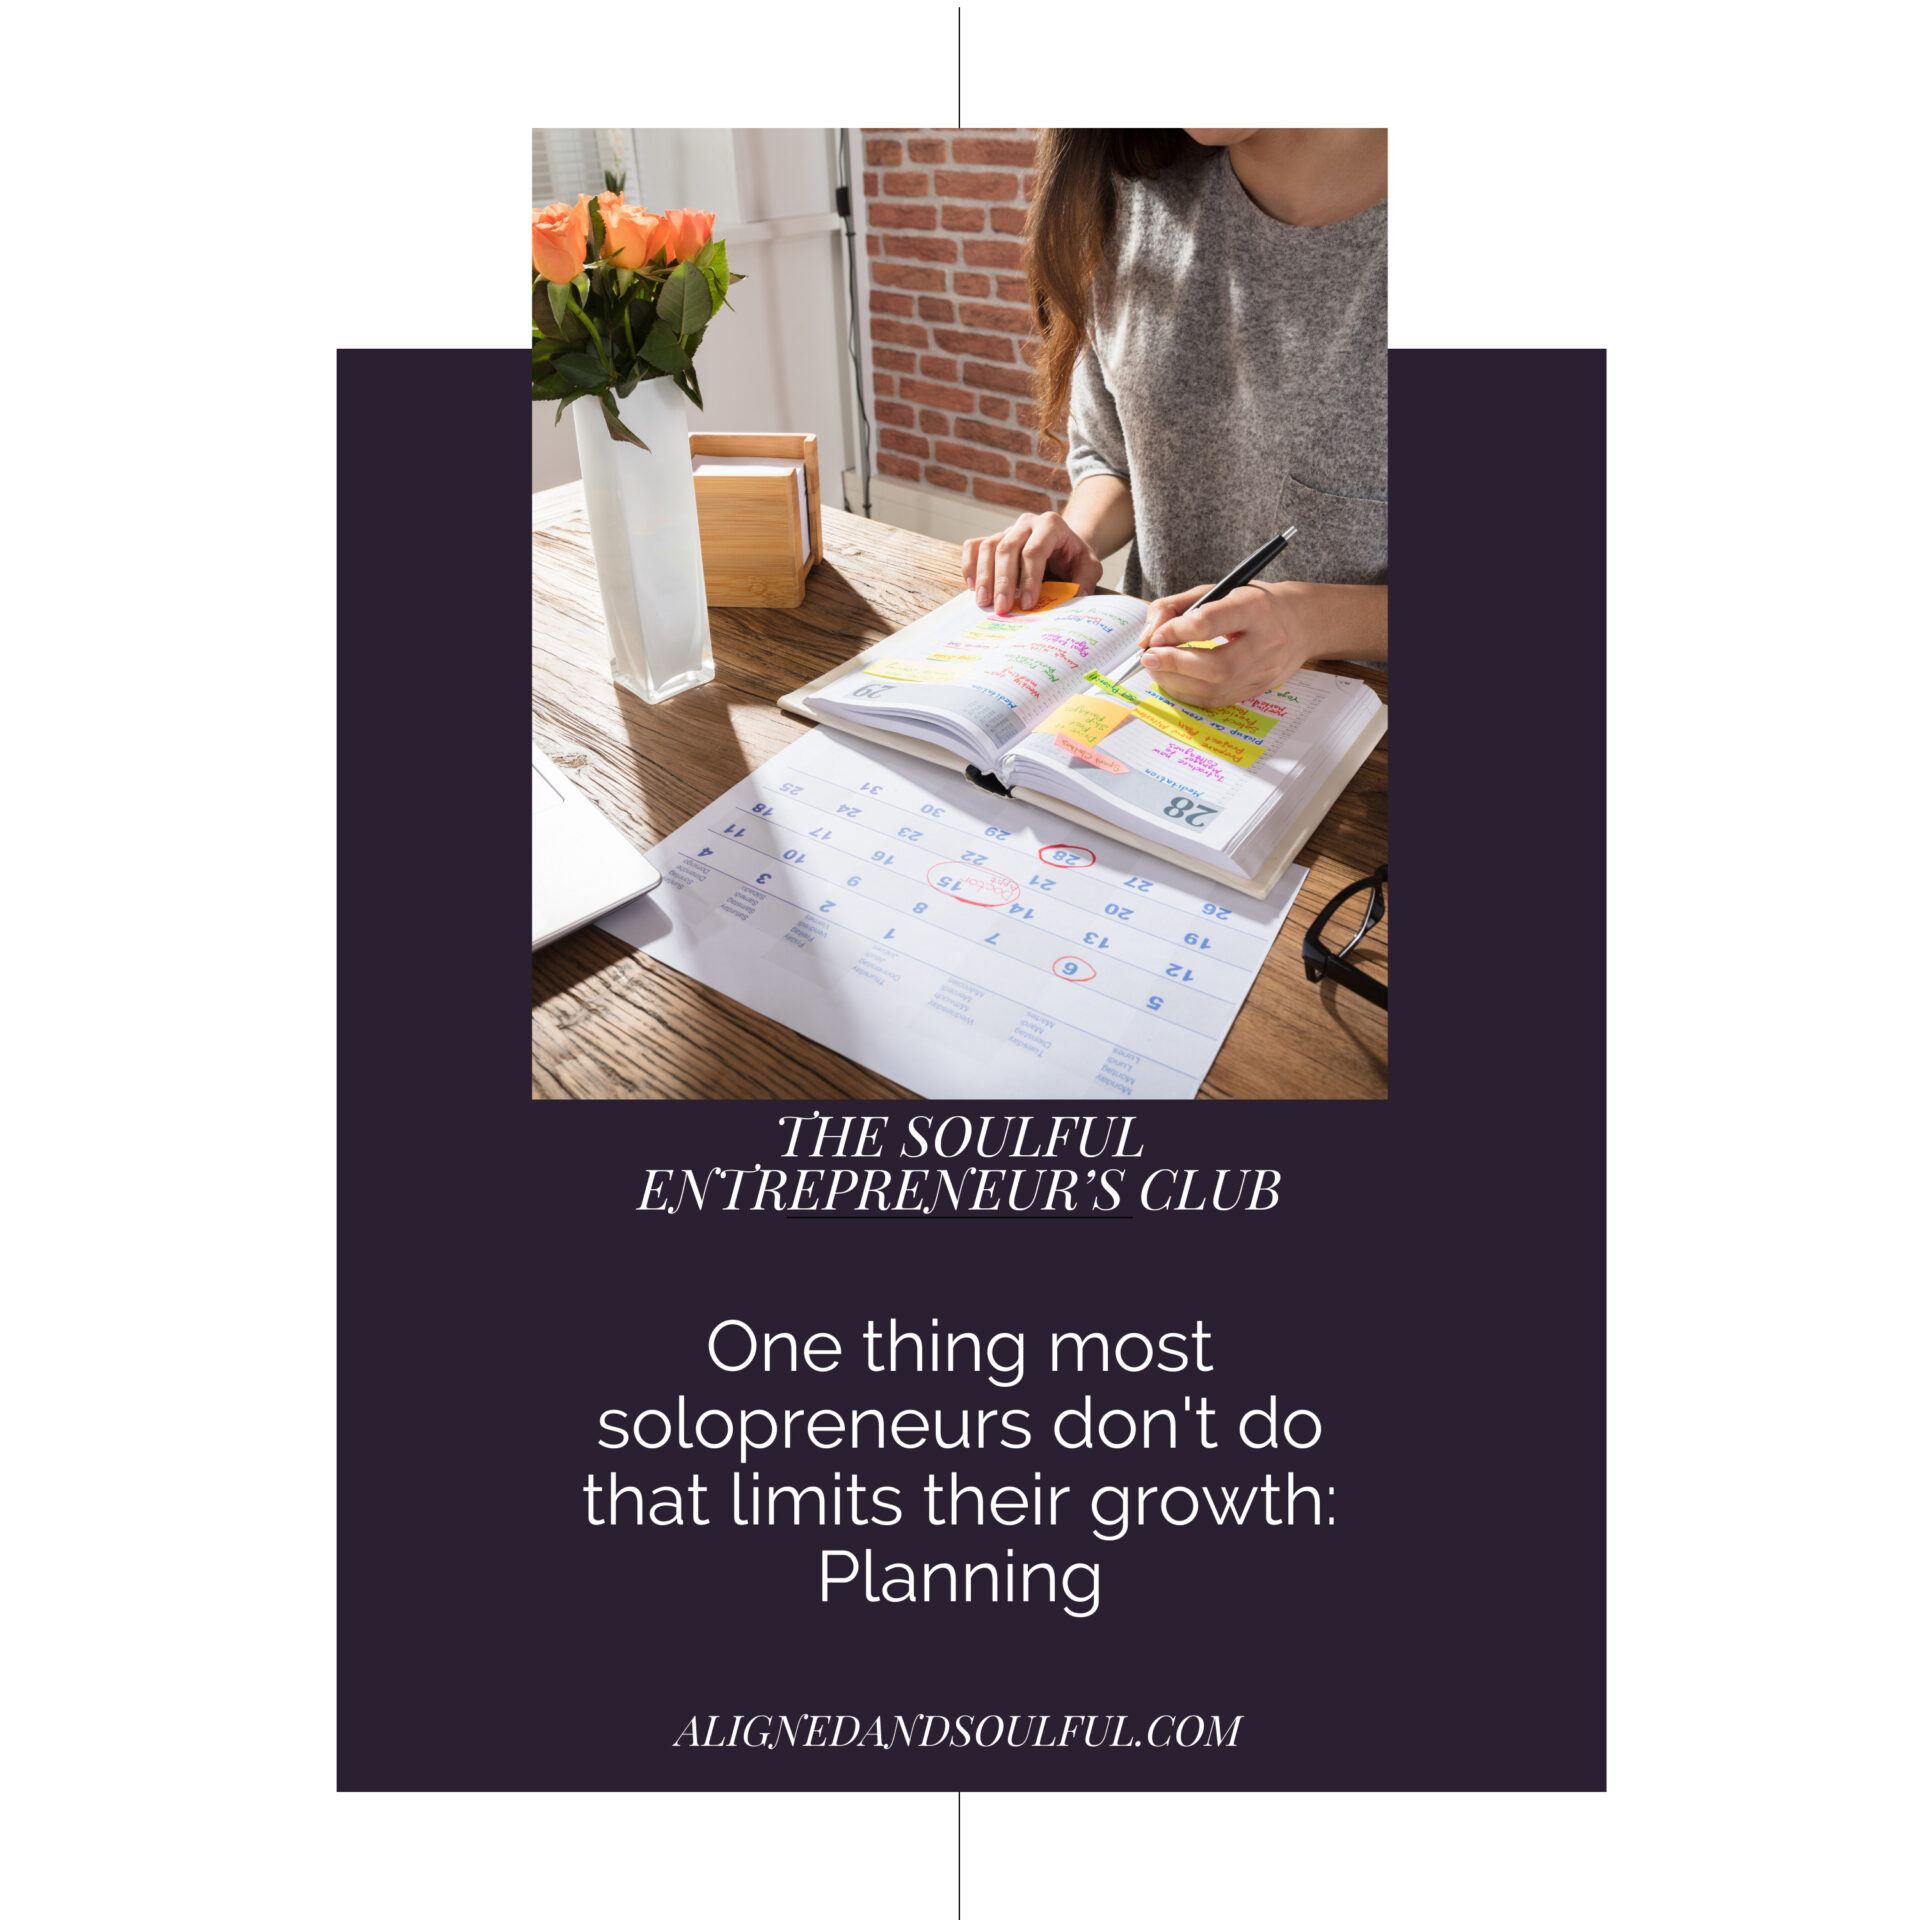 one thing most solopreneurs don't do that limits their growth